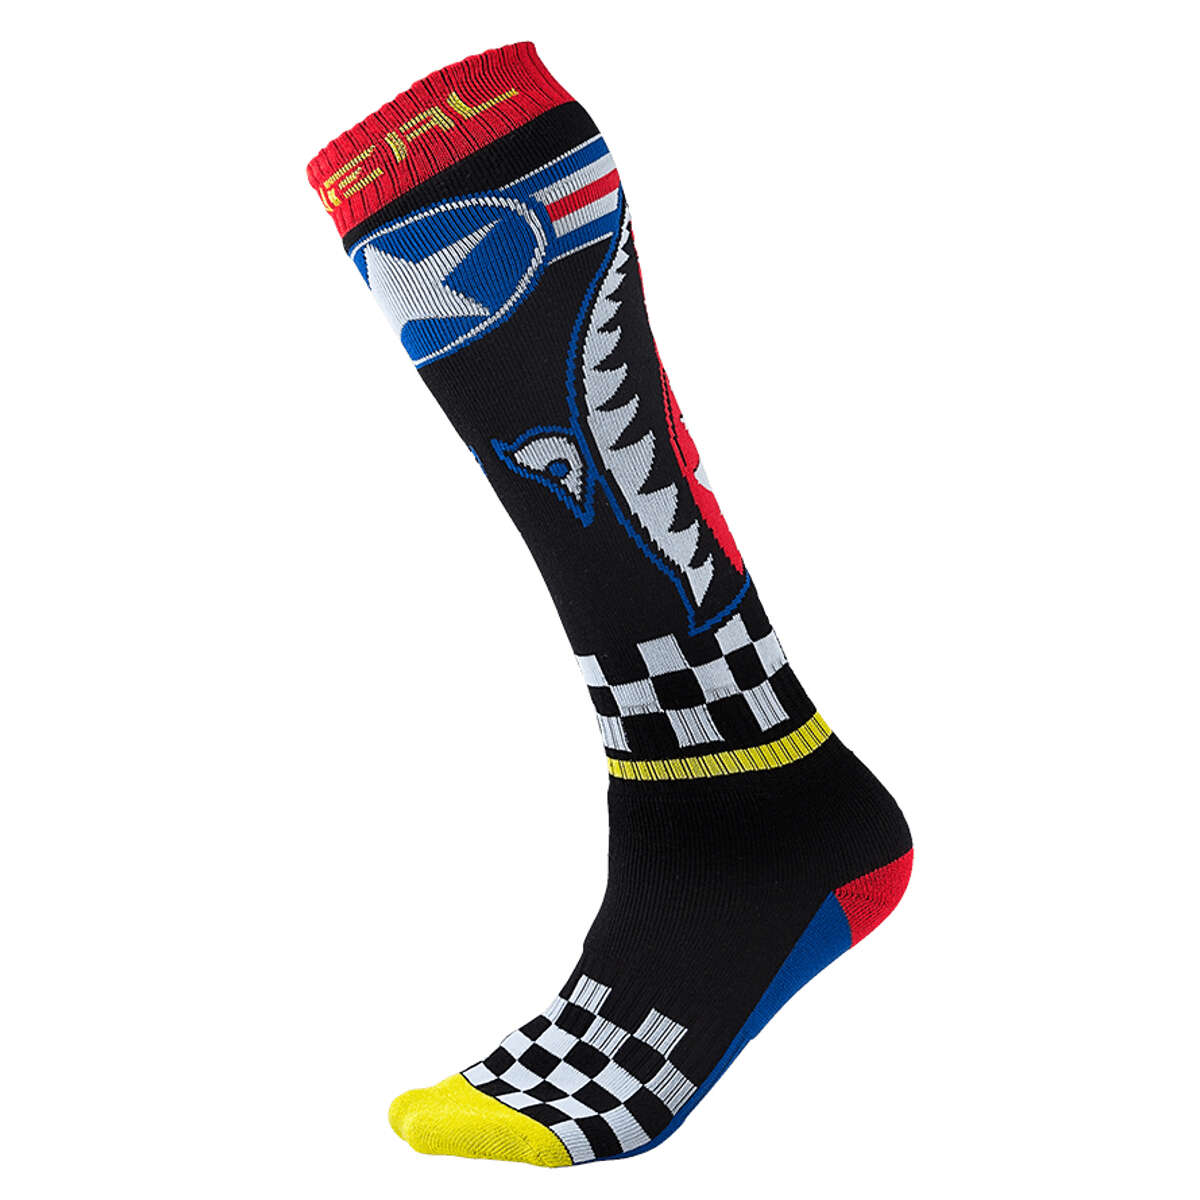 O'Neal Chaussettes Pro MX Wingman - Black/Blue/Red/Yellow